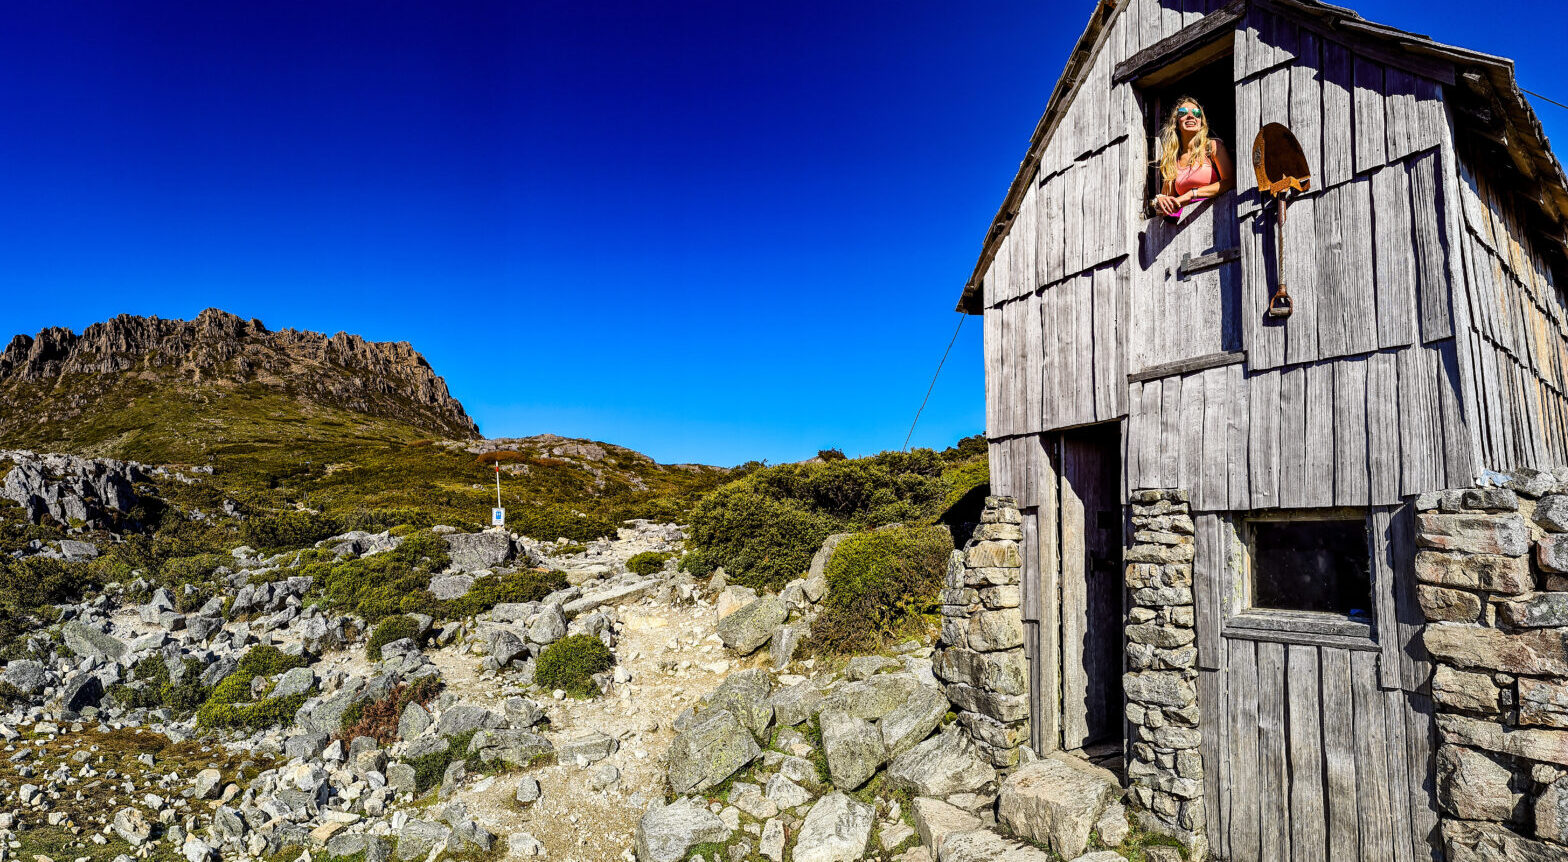 A wooden Hut and the Beginning  of the Cradle mountain summit